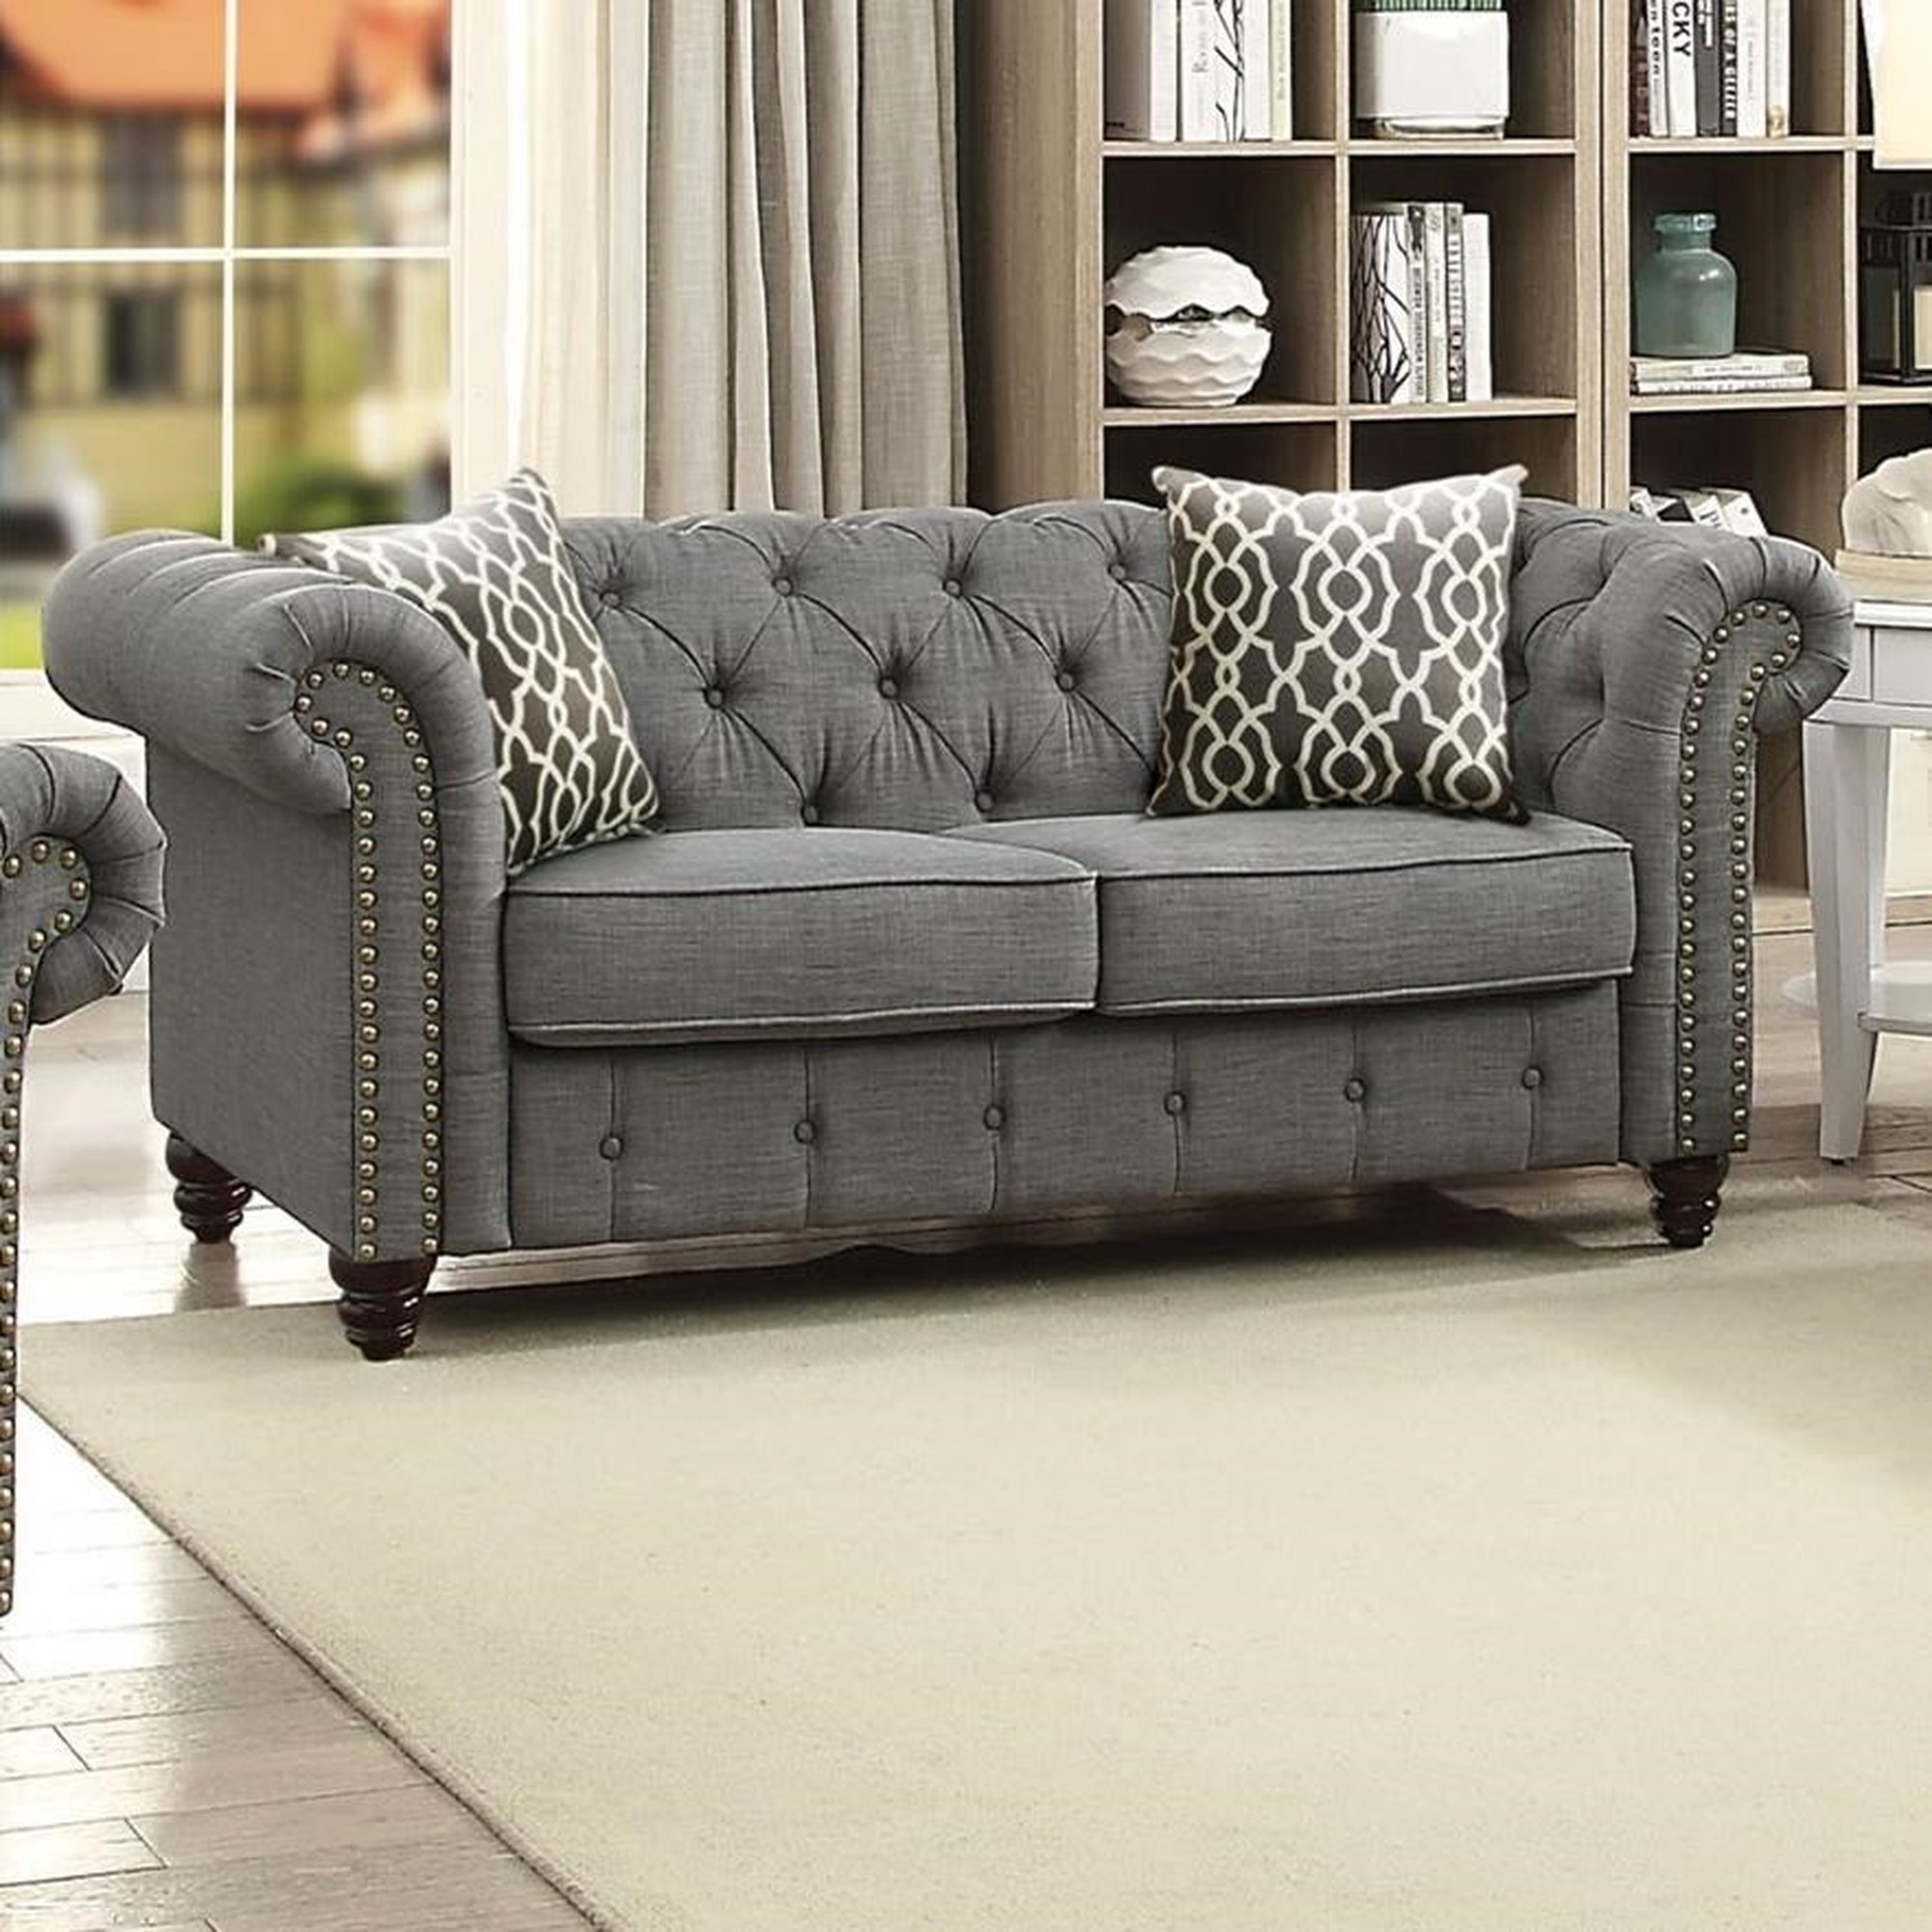 Acme Furniture Aurelia 52426 Loveseats Transitional | | High Del Sol with Furniture Tufting Loveseat Back